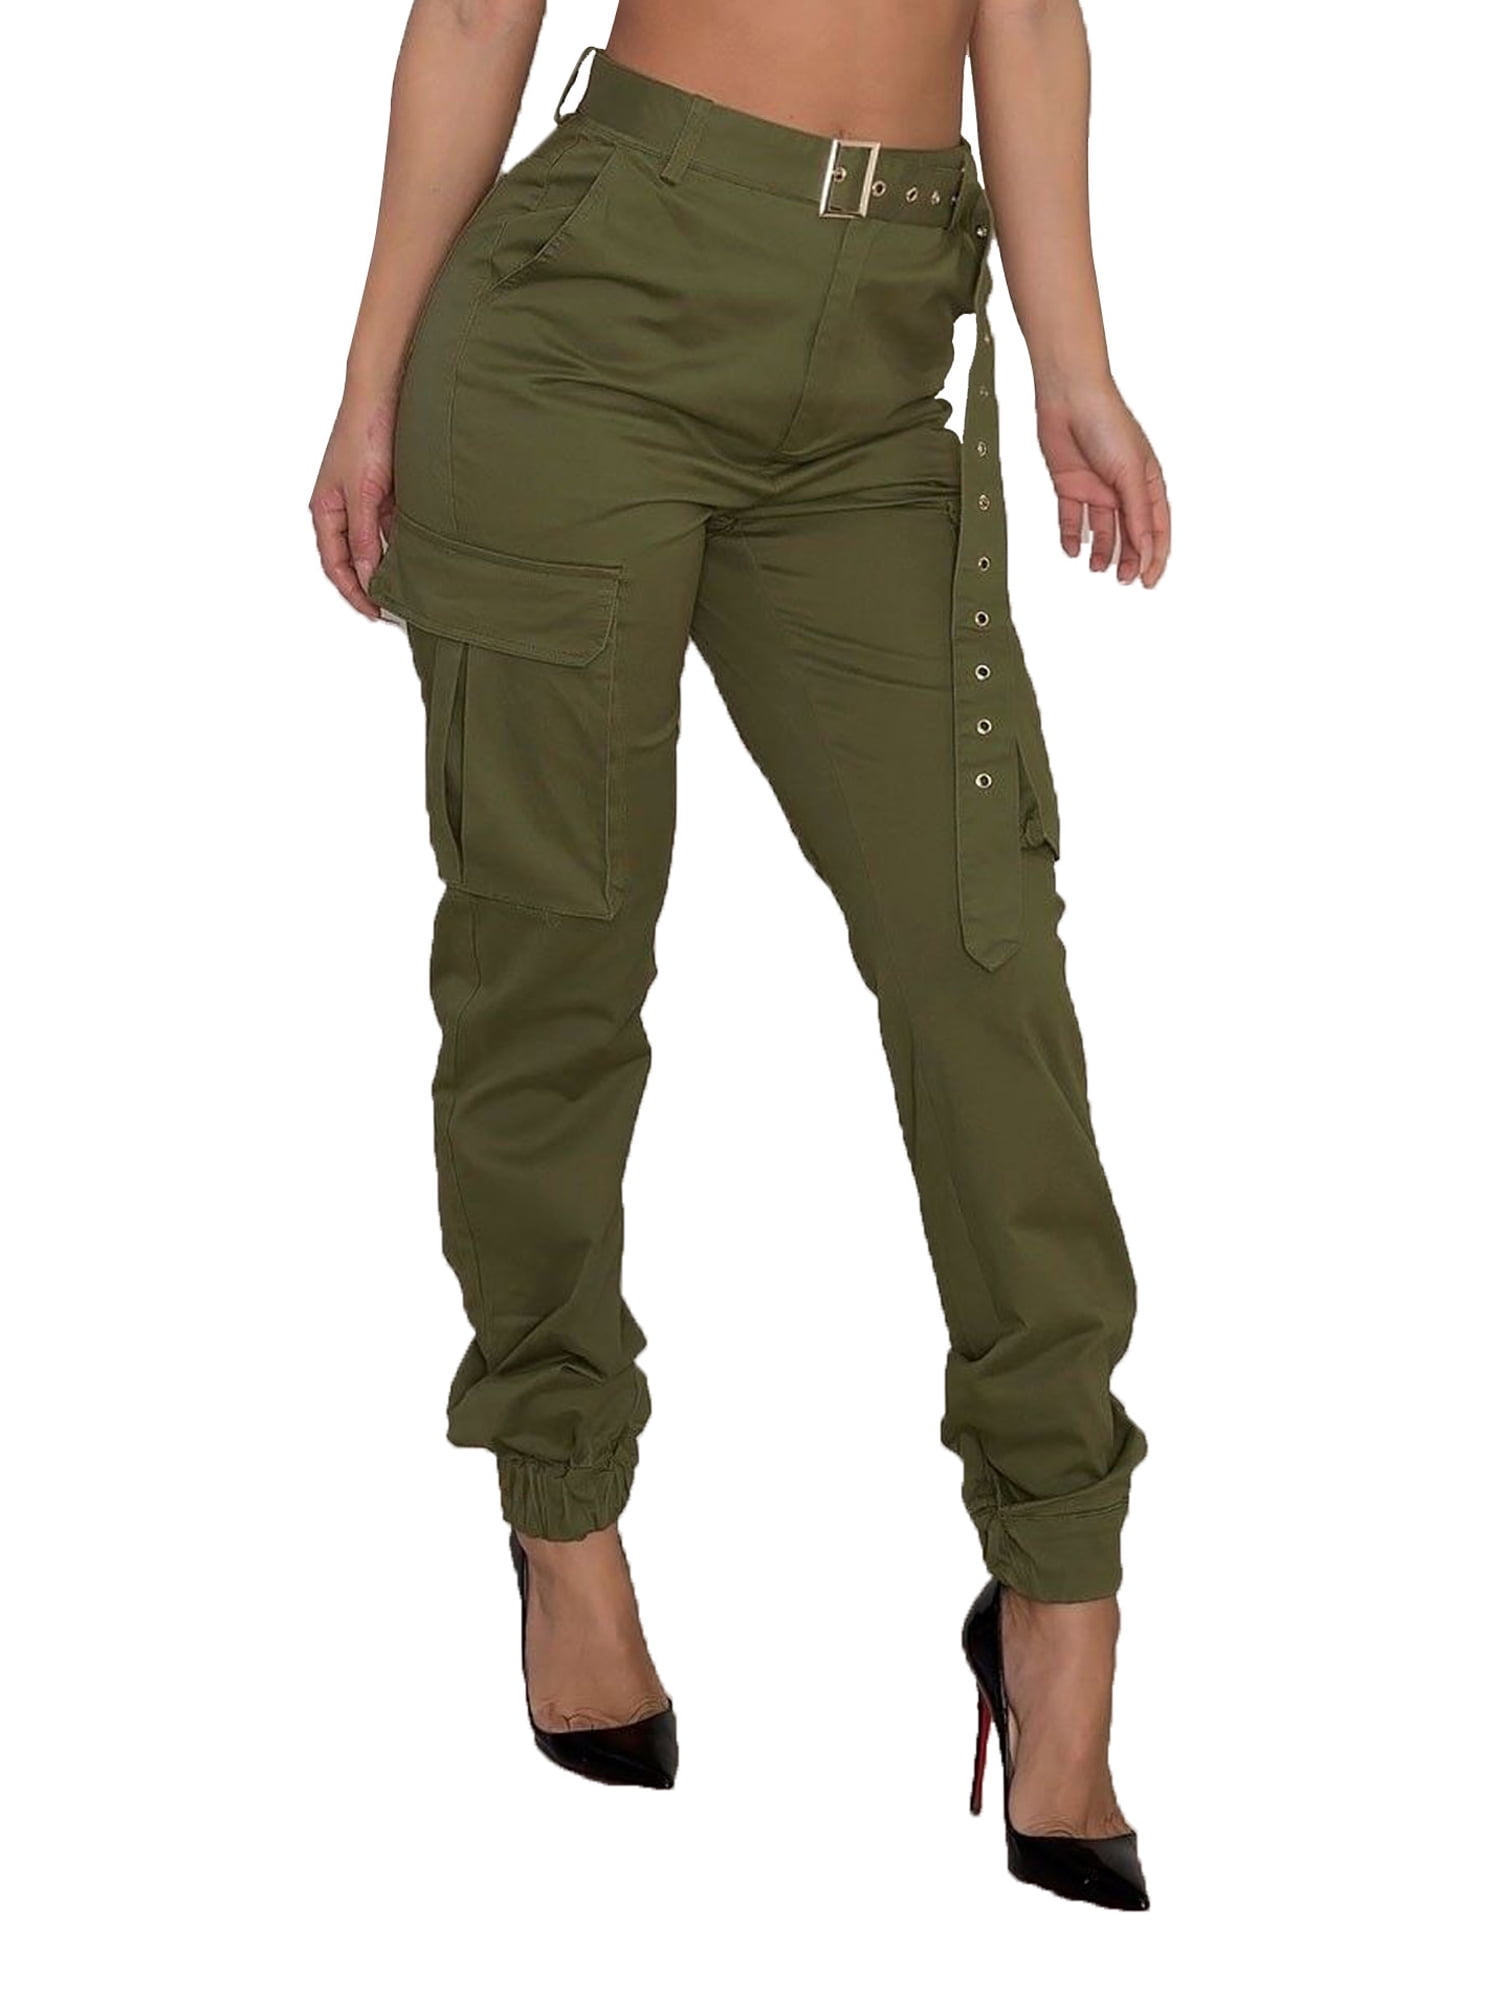 Womens Zip Off Convertible Trousers Multi Pockets Army Casual Cargo Ladies Pants 